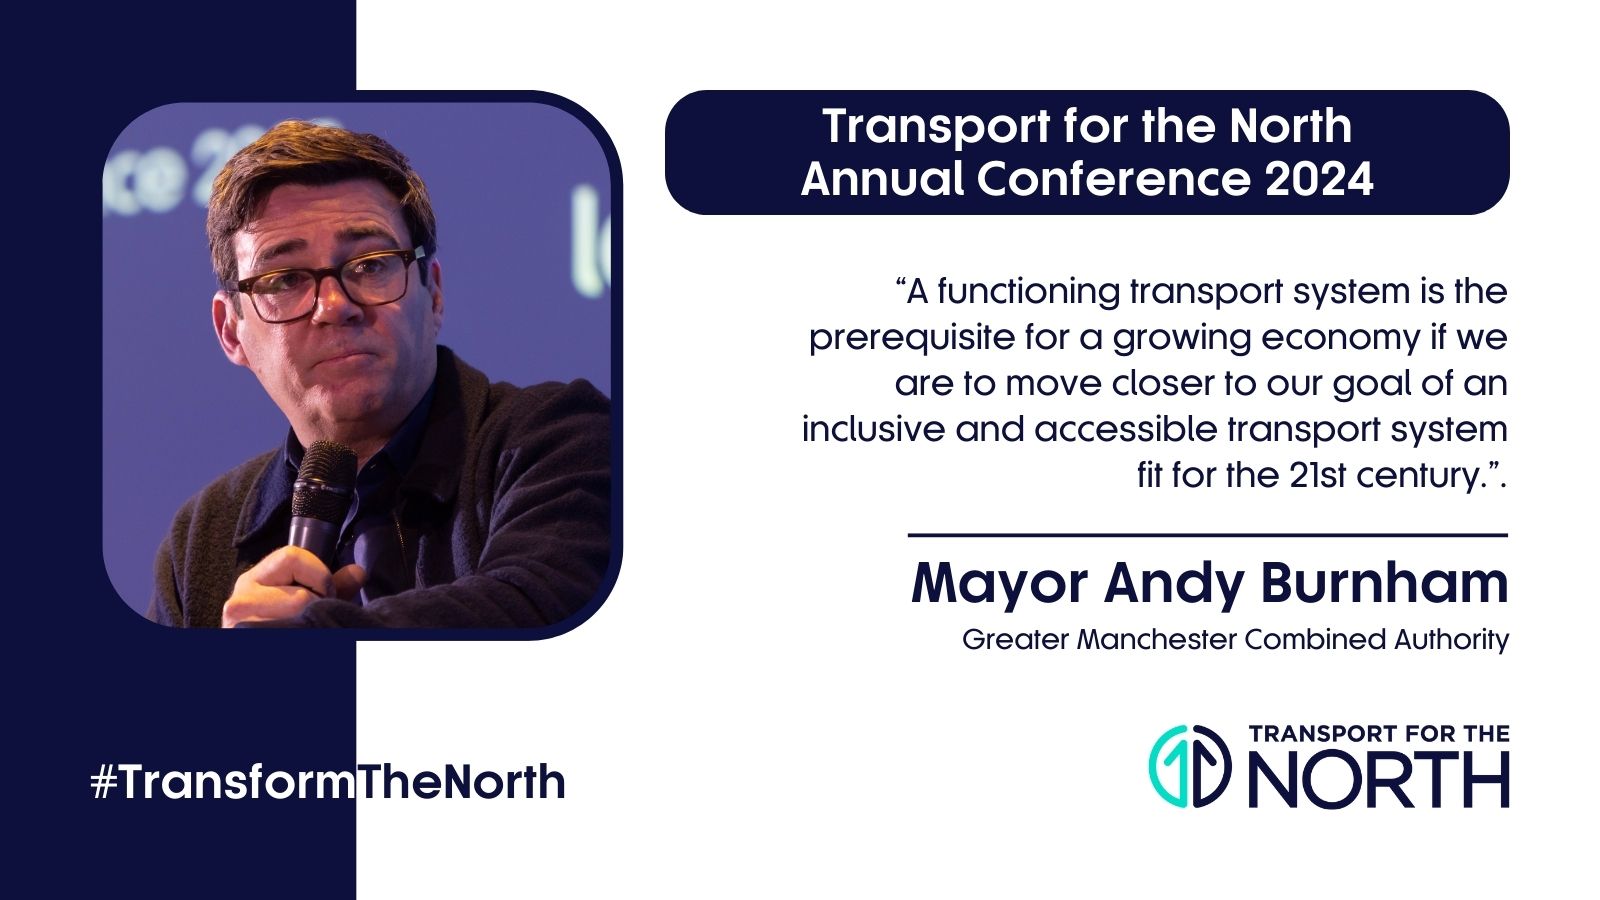 Mayor Andy Burnham talks about hte need for a functioning transport system